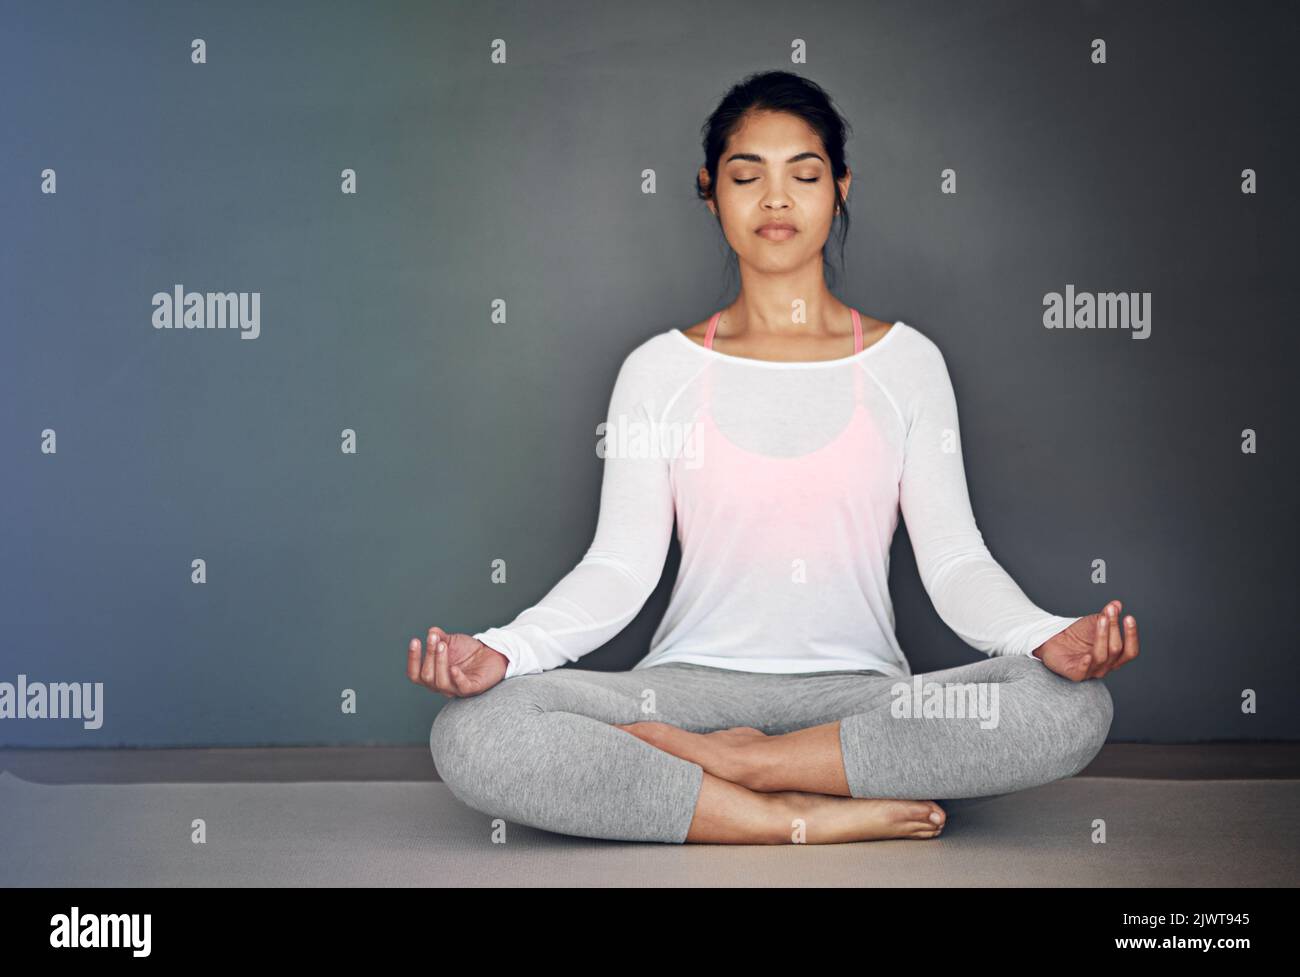 Creating her own calm. an attractive young woman meditating. Stock Photo